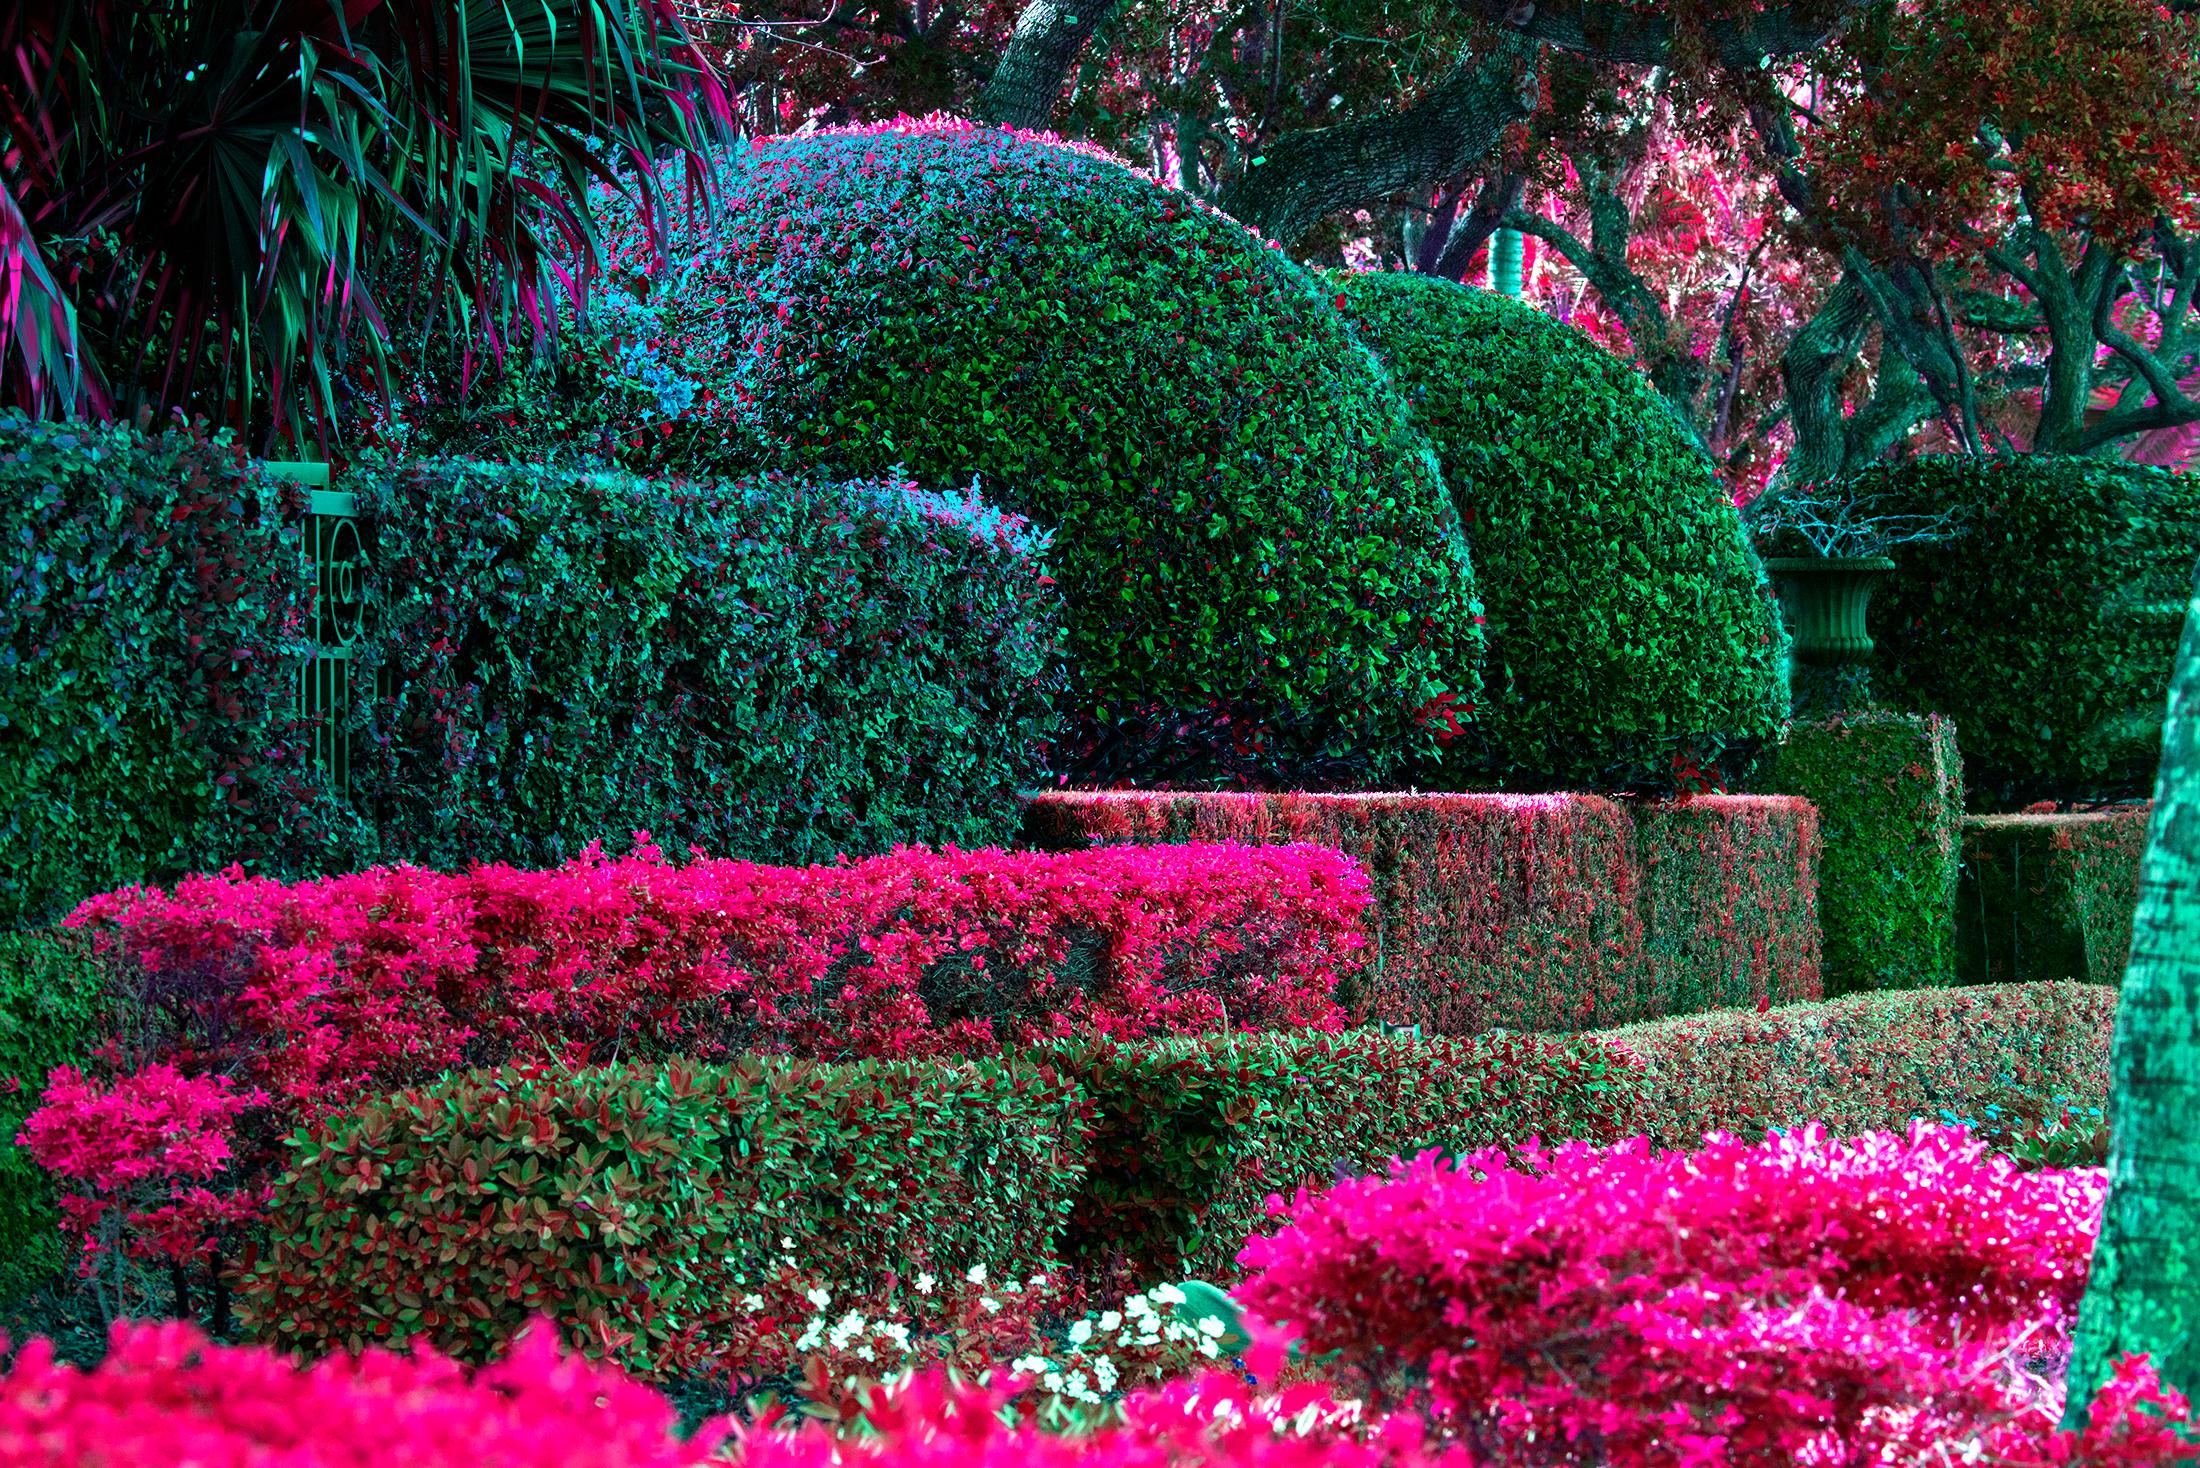 Robert Funk Abstract Photograph - Hedge Fun - The Biltmore Hotel Coral Gables